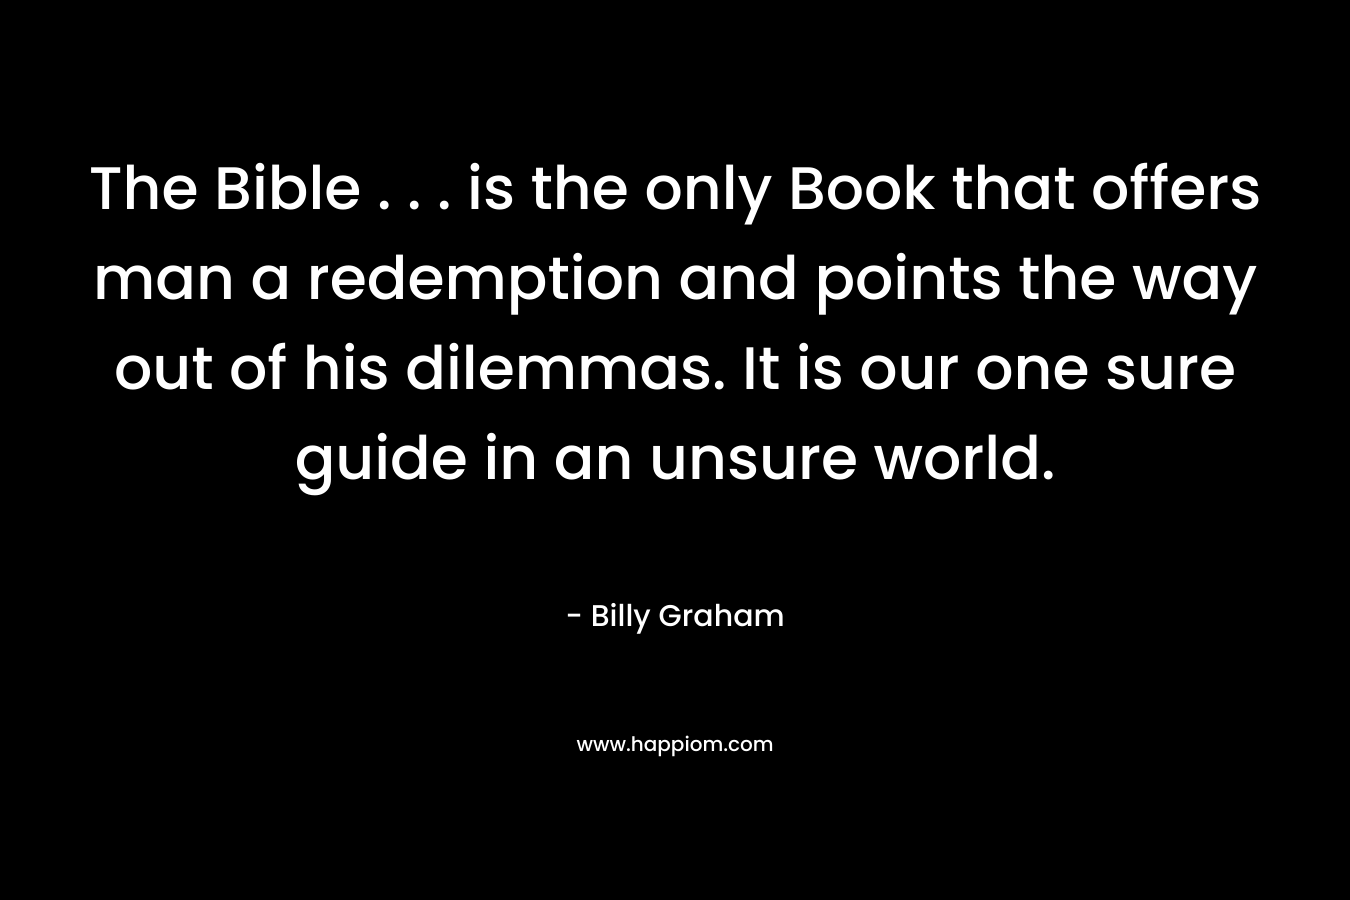 The Bible . . . is the only Book that offers man a redemption and points the way out of his dilemmas. It is our one sure guide in an unsure world.